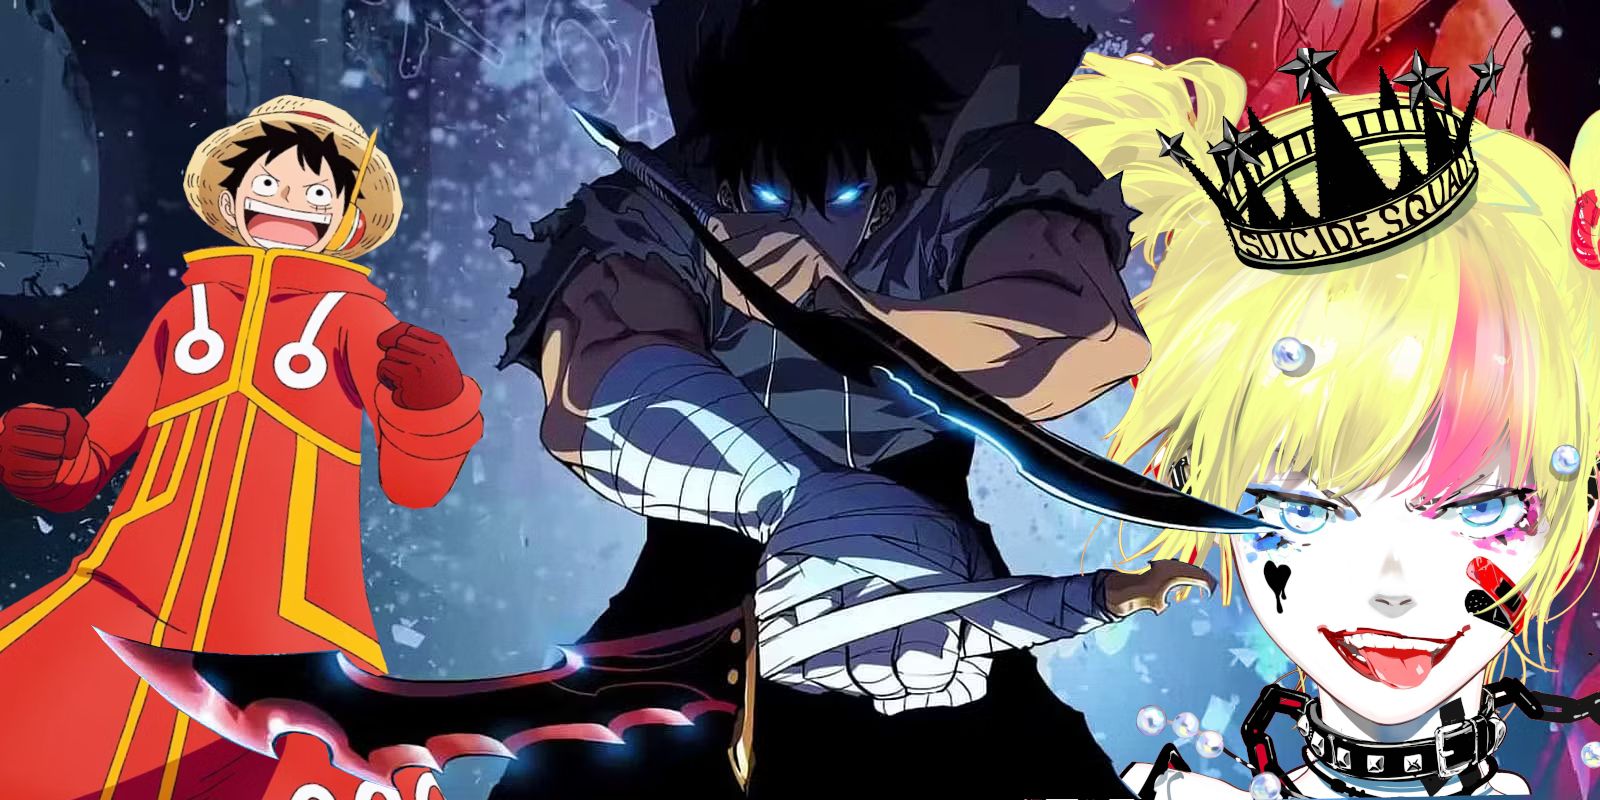 Image of antcipated animes features Luffy from One Piece, Harley Quinn from the Suicide Squad, and Jinwoo from Solo Leveling.